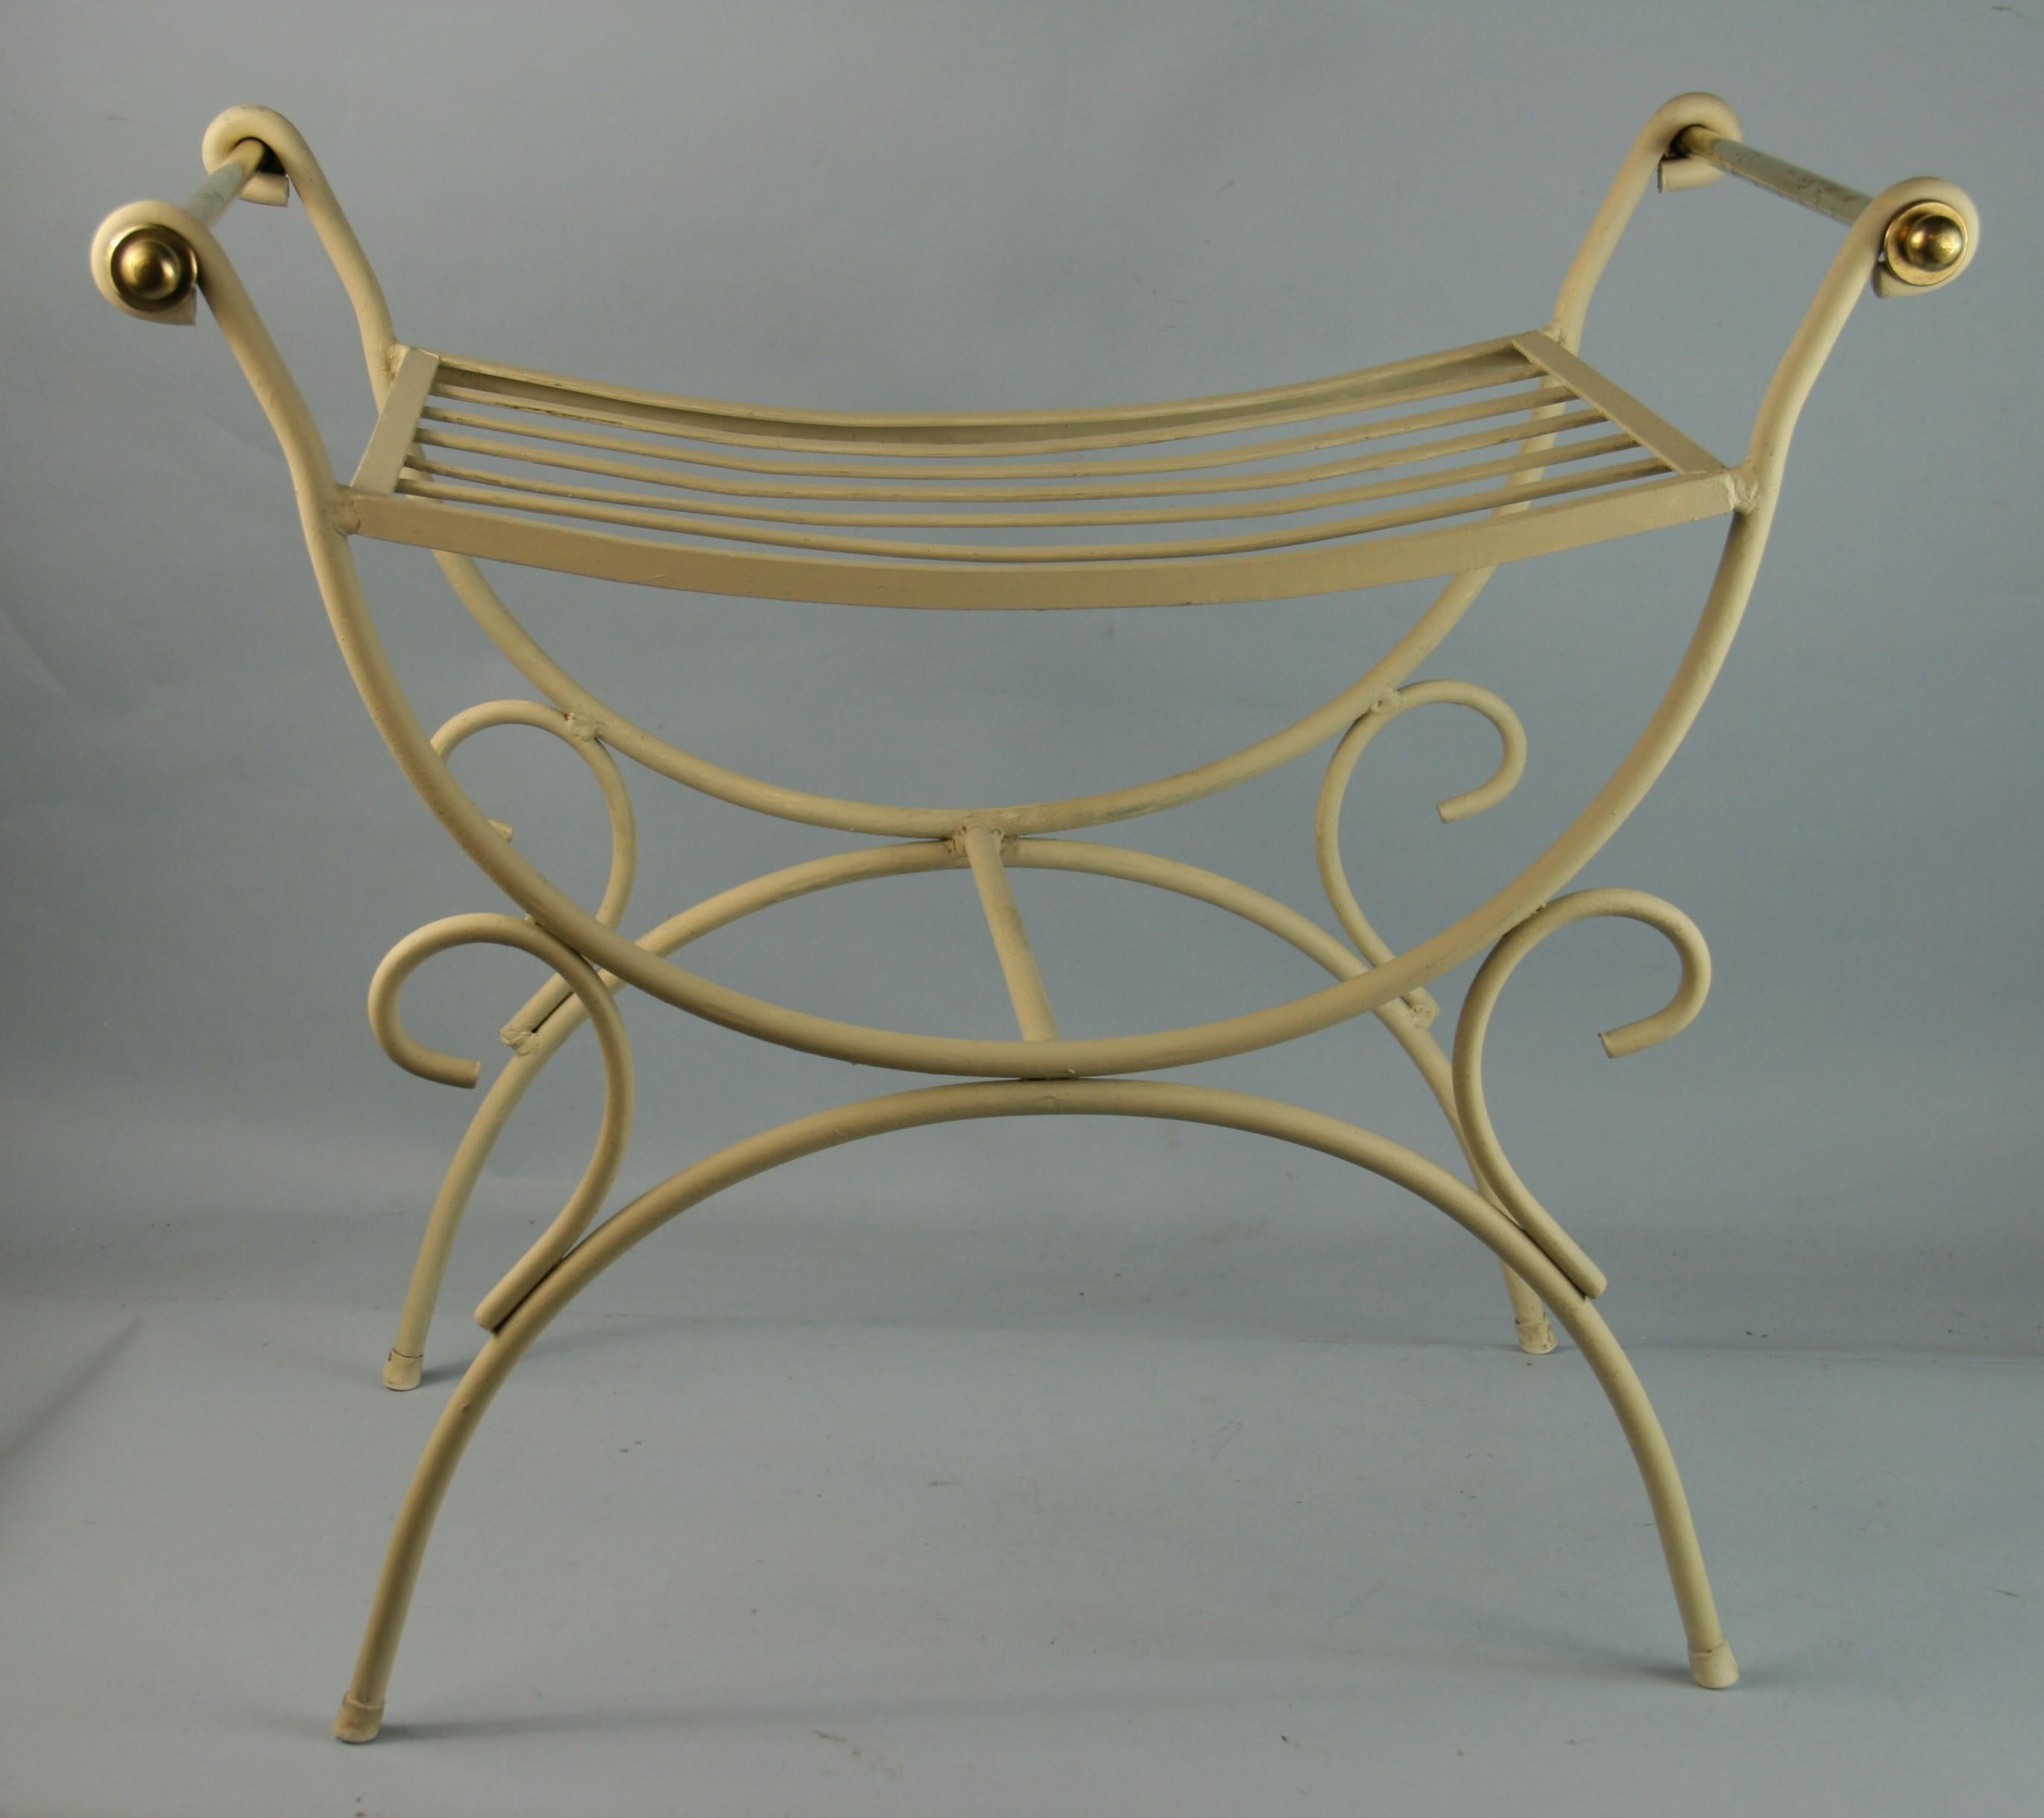 Italian metal bench with curved seat and brass handles.